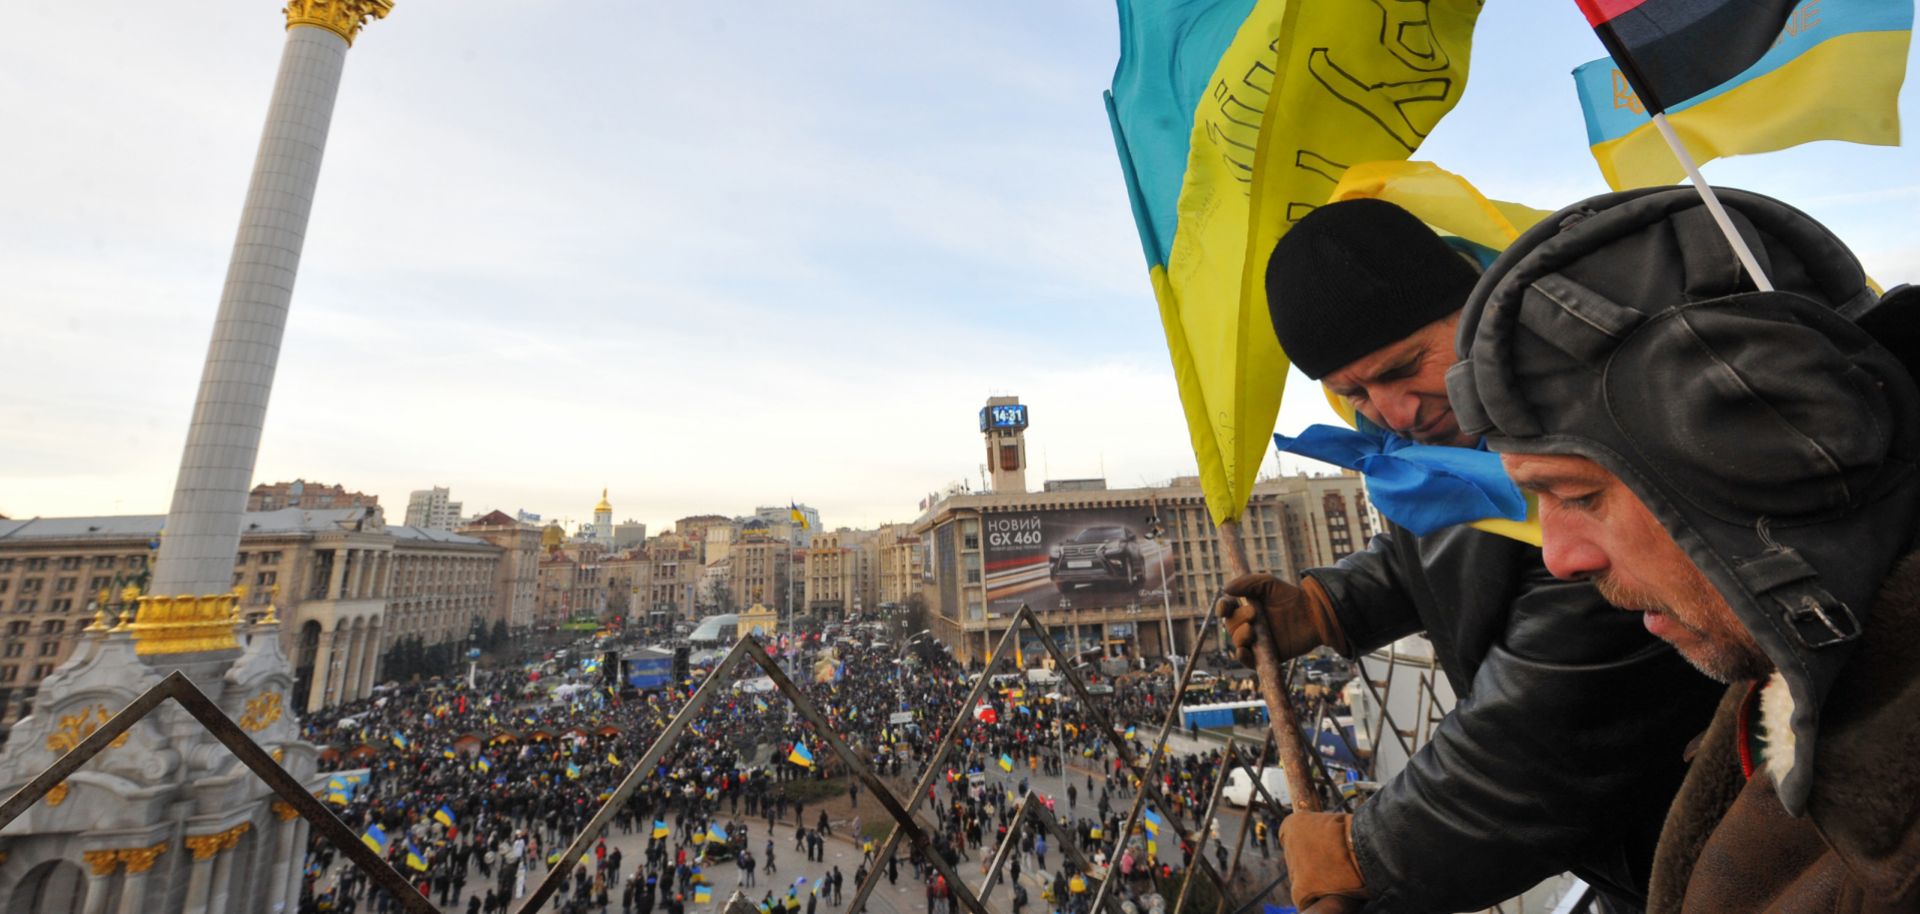 Opposition protesters place flags on surrounding buildings as thousands rallied in Independence Square in Kiev on Dec. 3. 